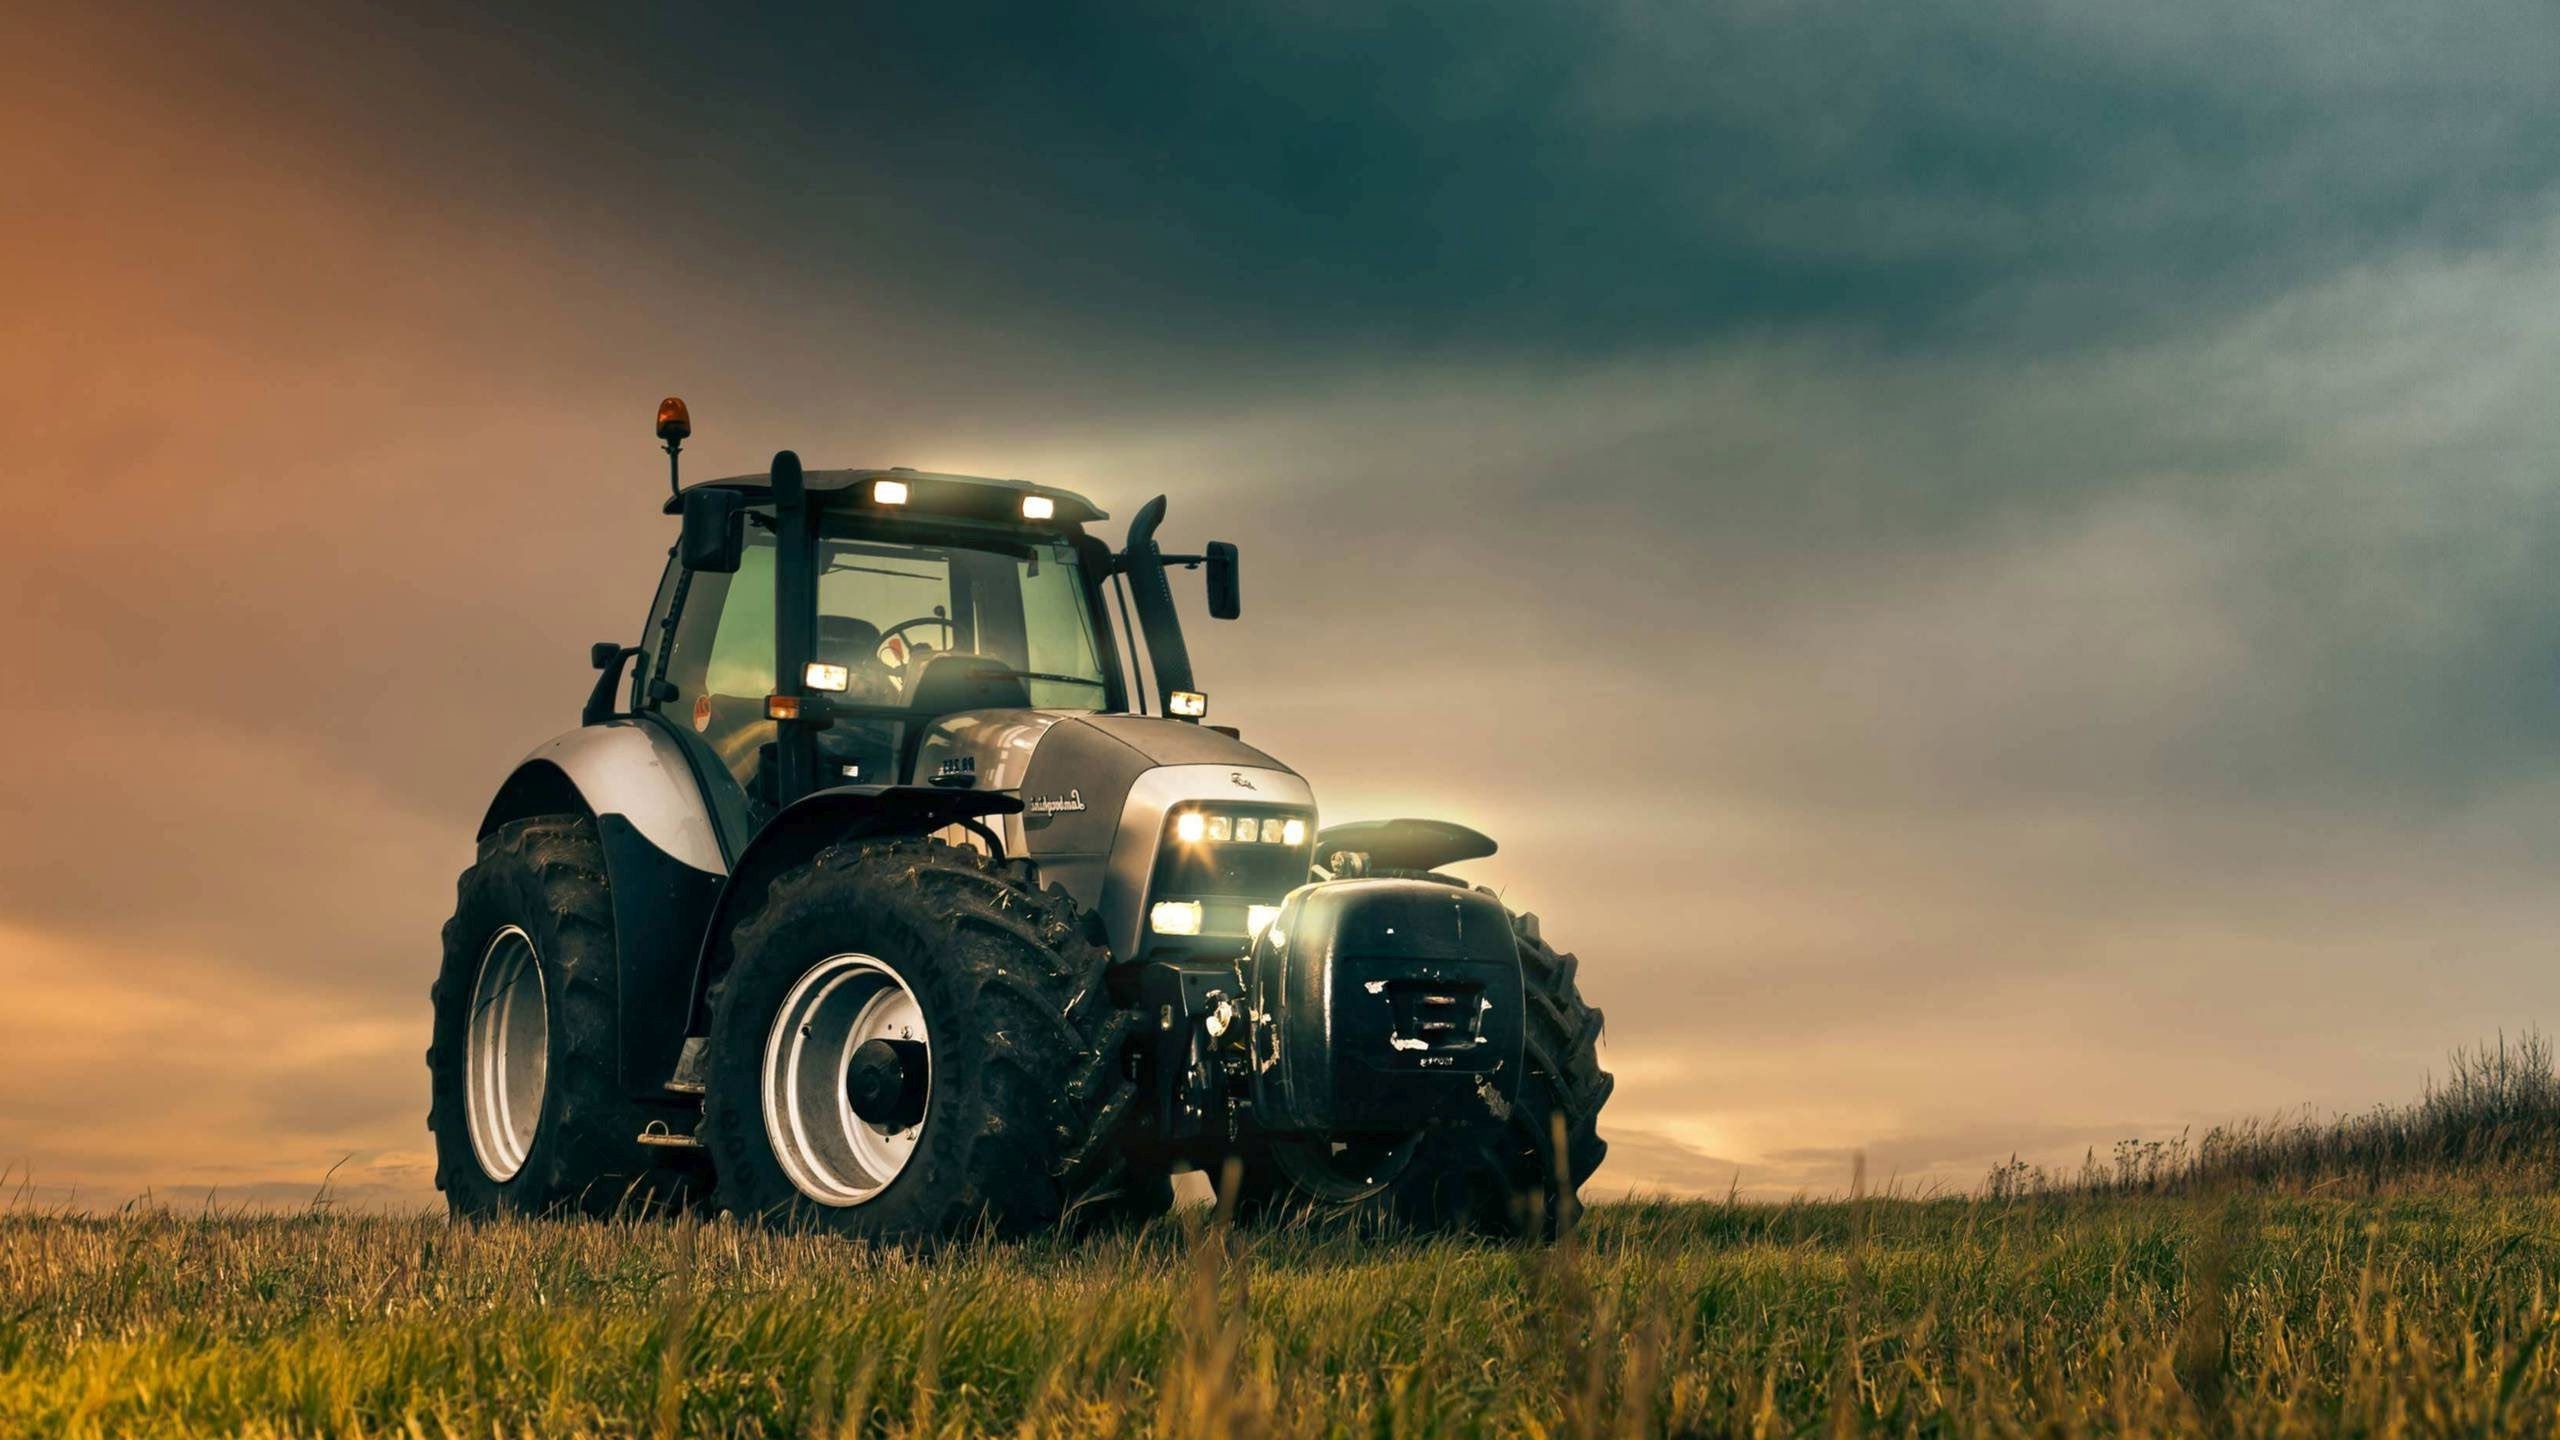 2560x1440 Christian Tractor Wallpaper Tractor Wallpapers HD Download | HD Wallpapers  | Pinterest .